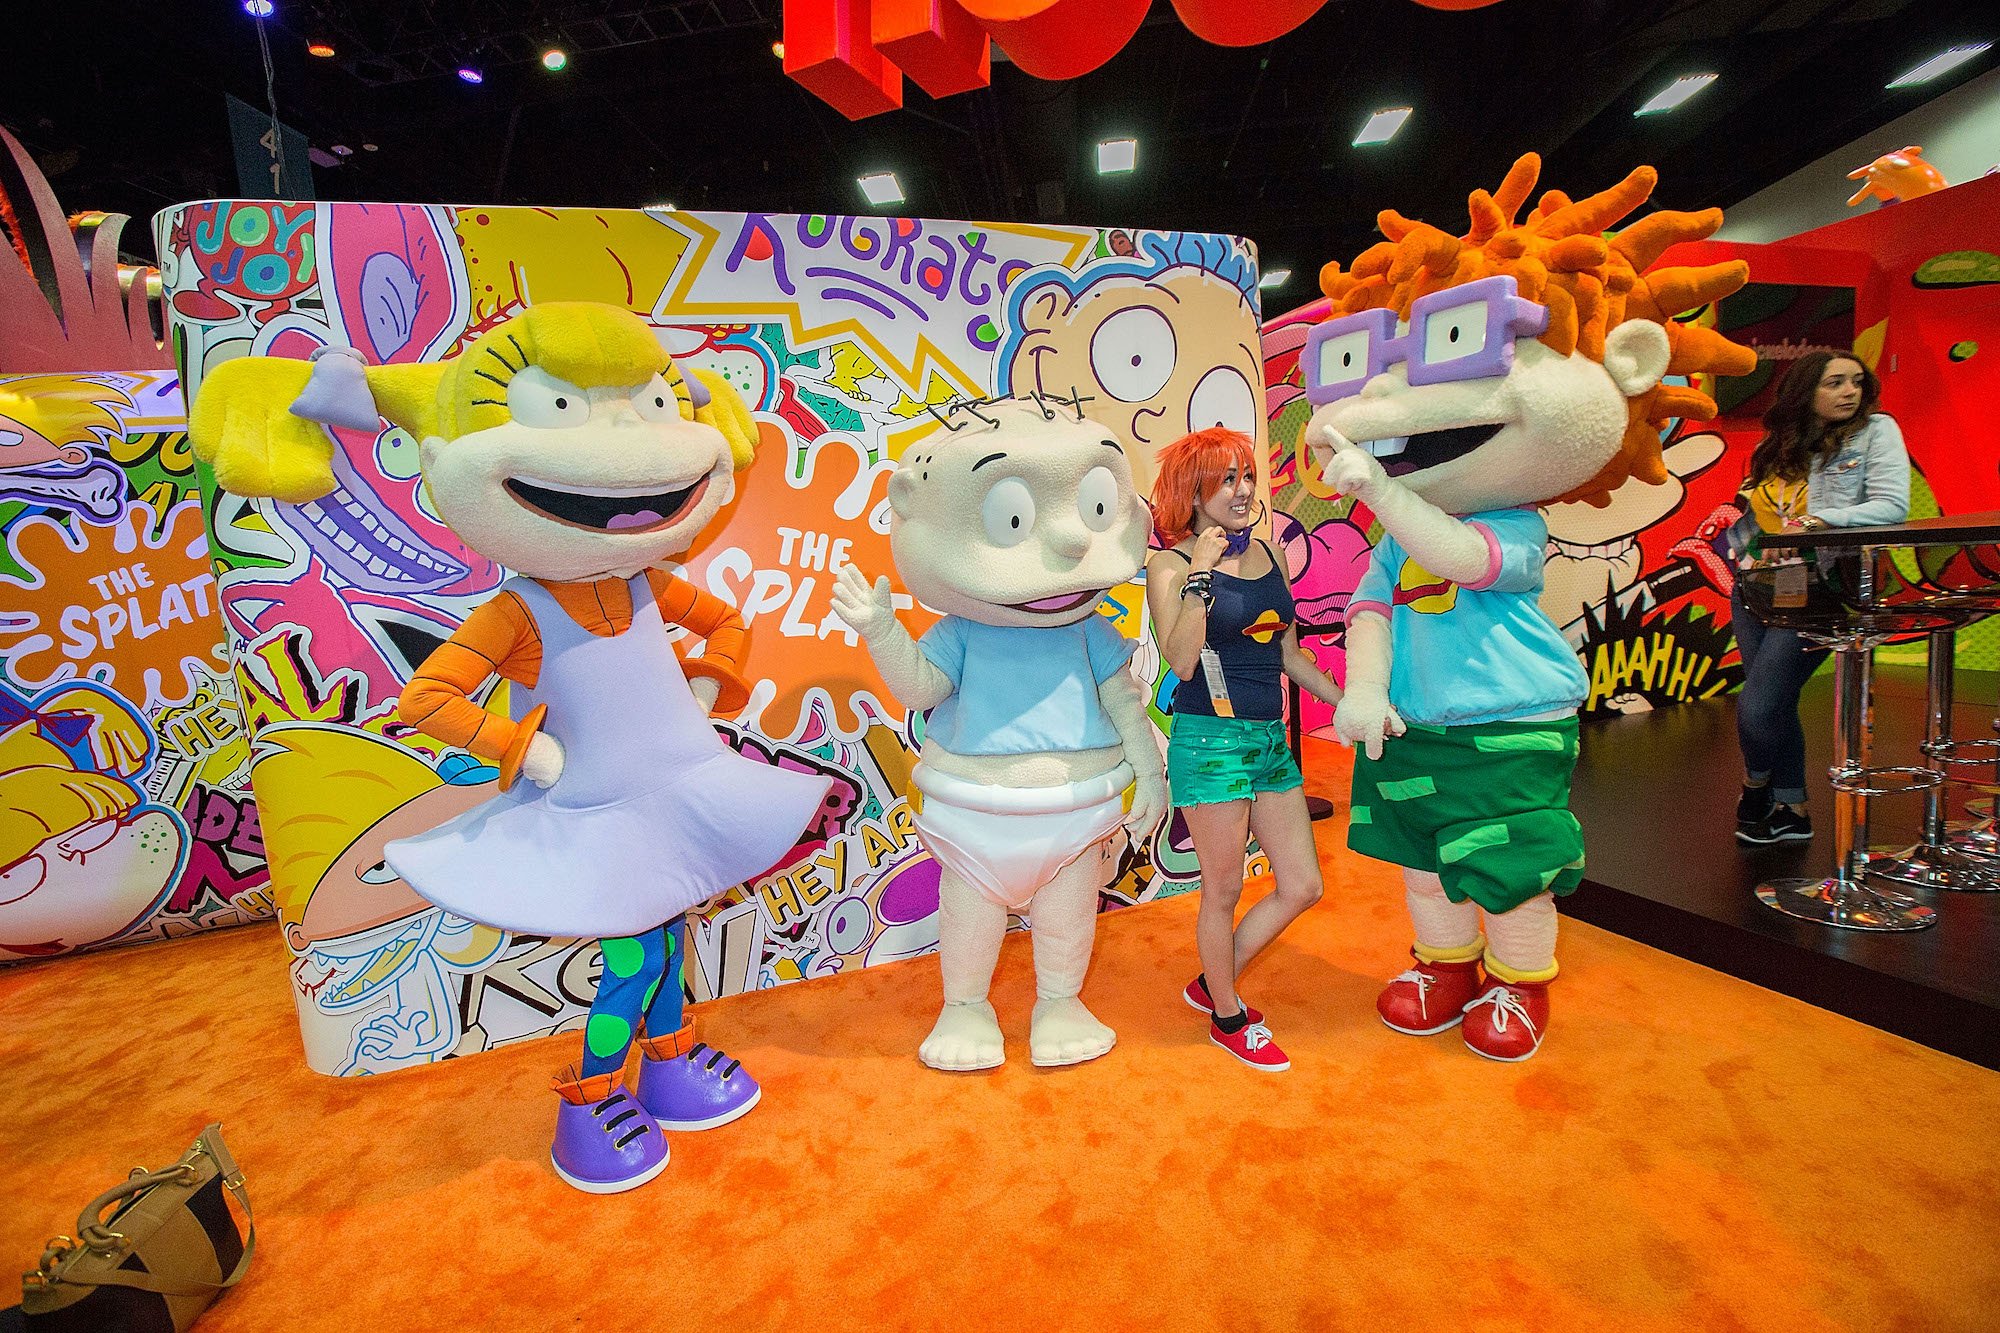 Characters from Nickelodeon's 'Rugrats' cartoon